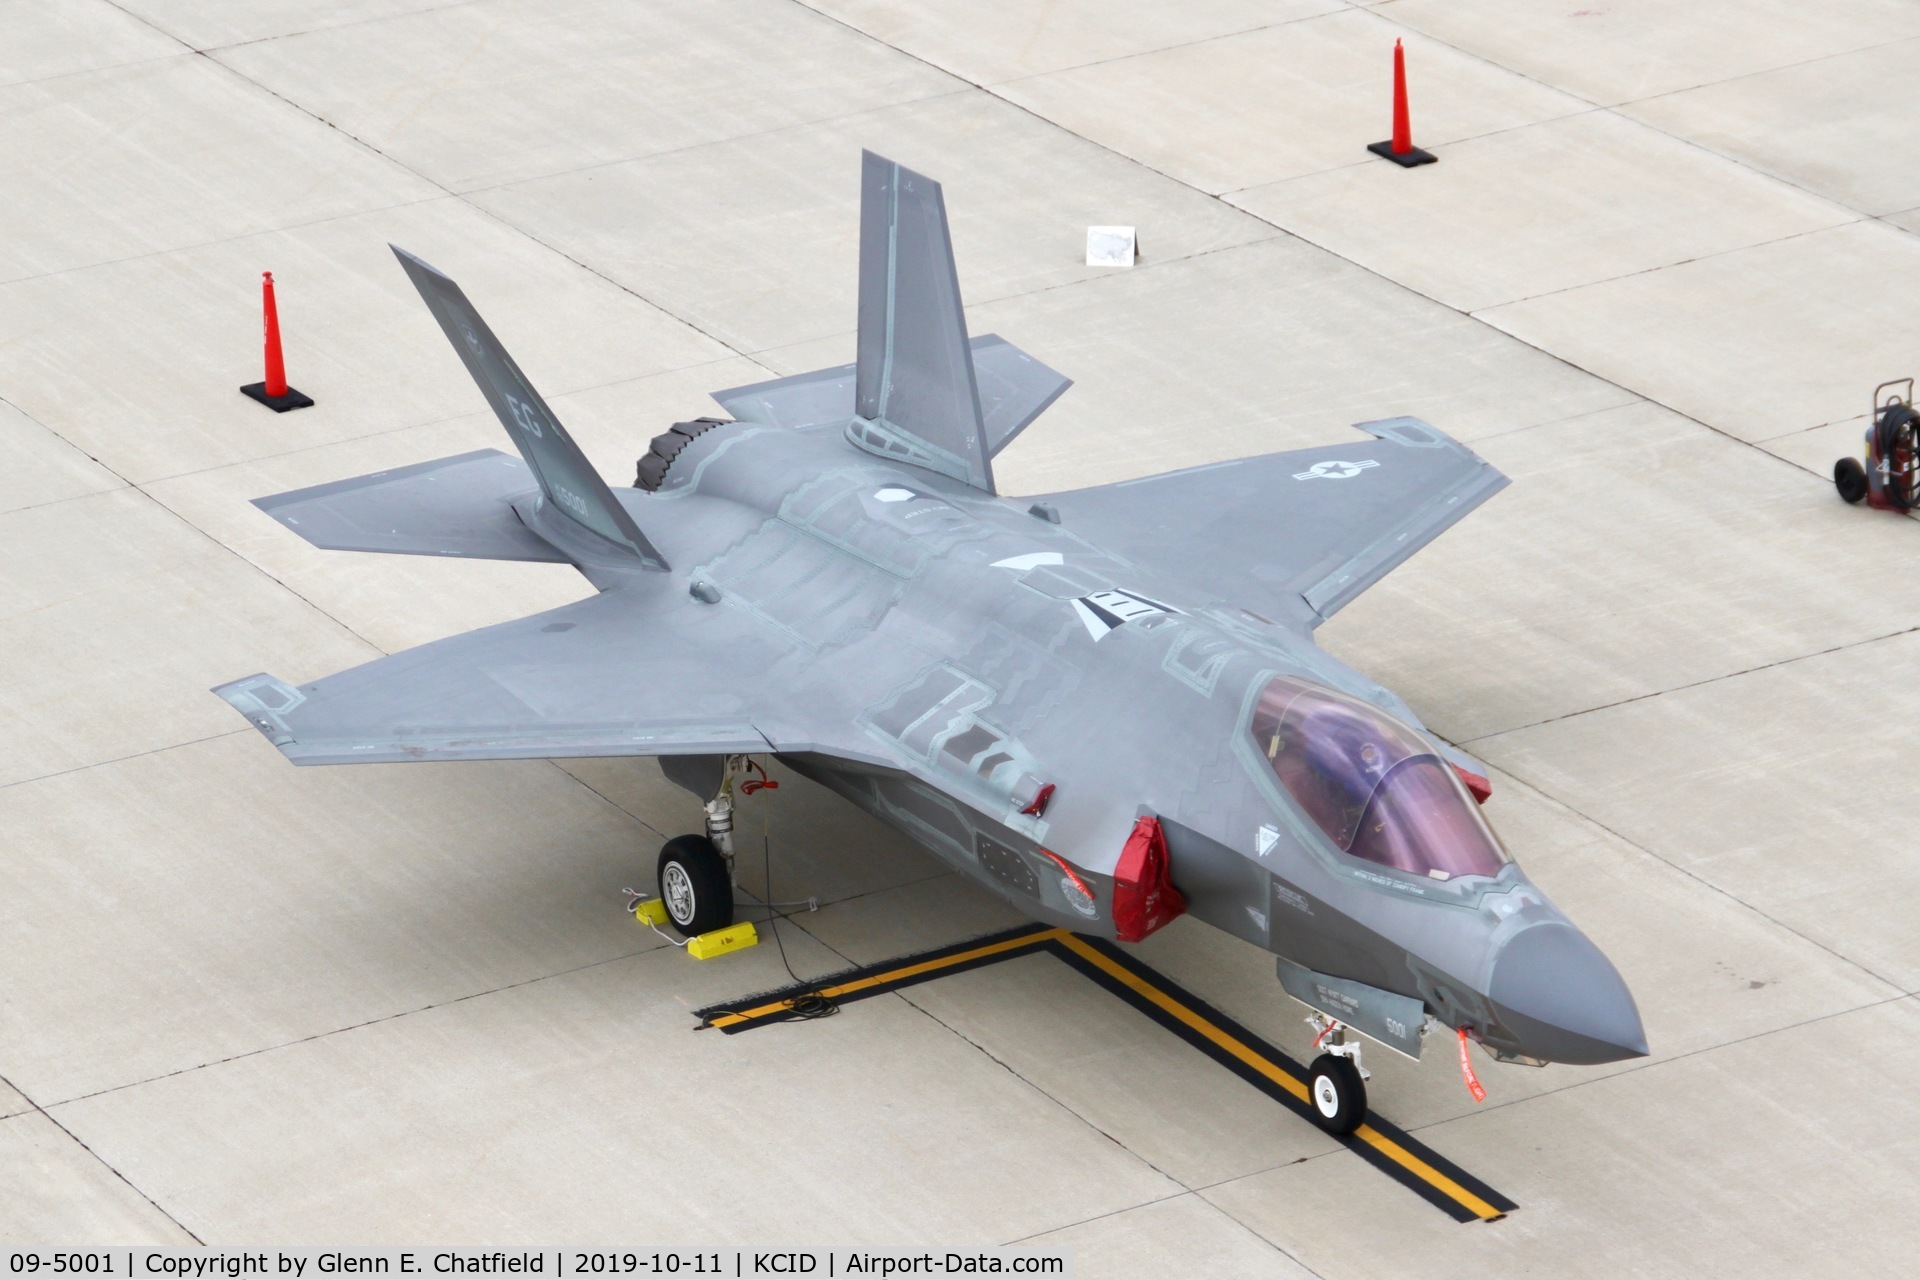 09-5001, 2011 Lockheed Martin F-35A Lightning II C/N AF-14, Photographed from the control tower